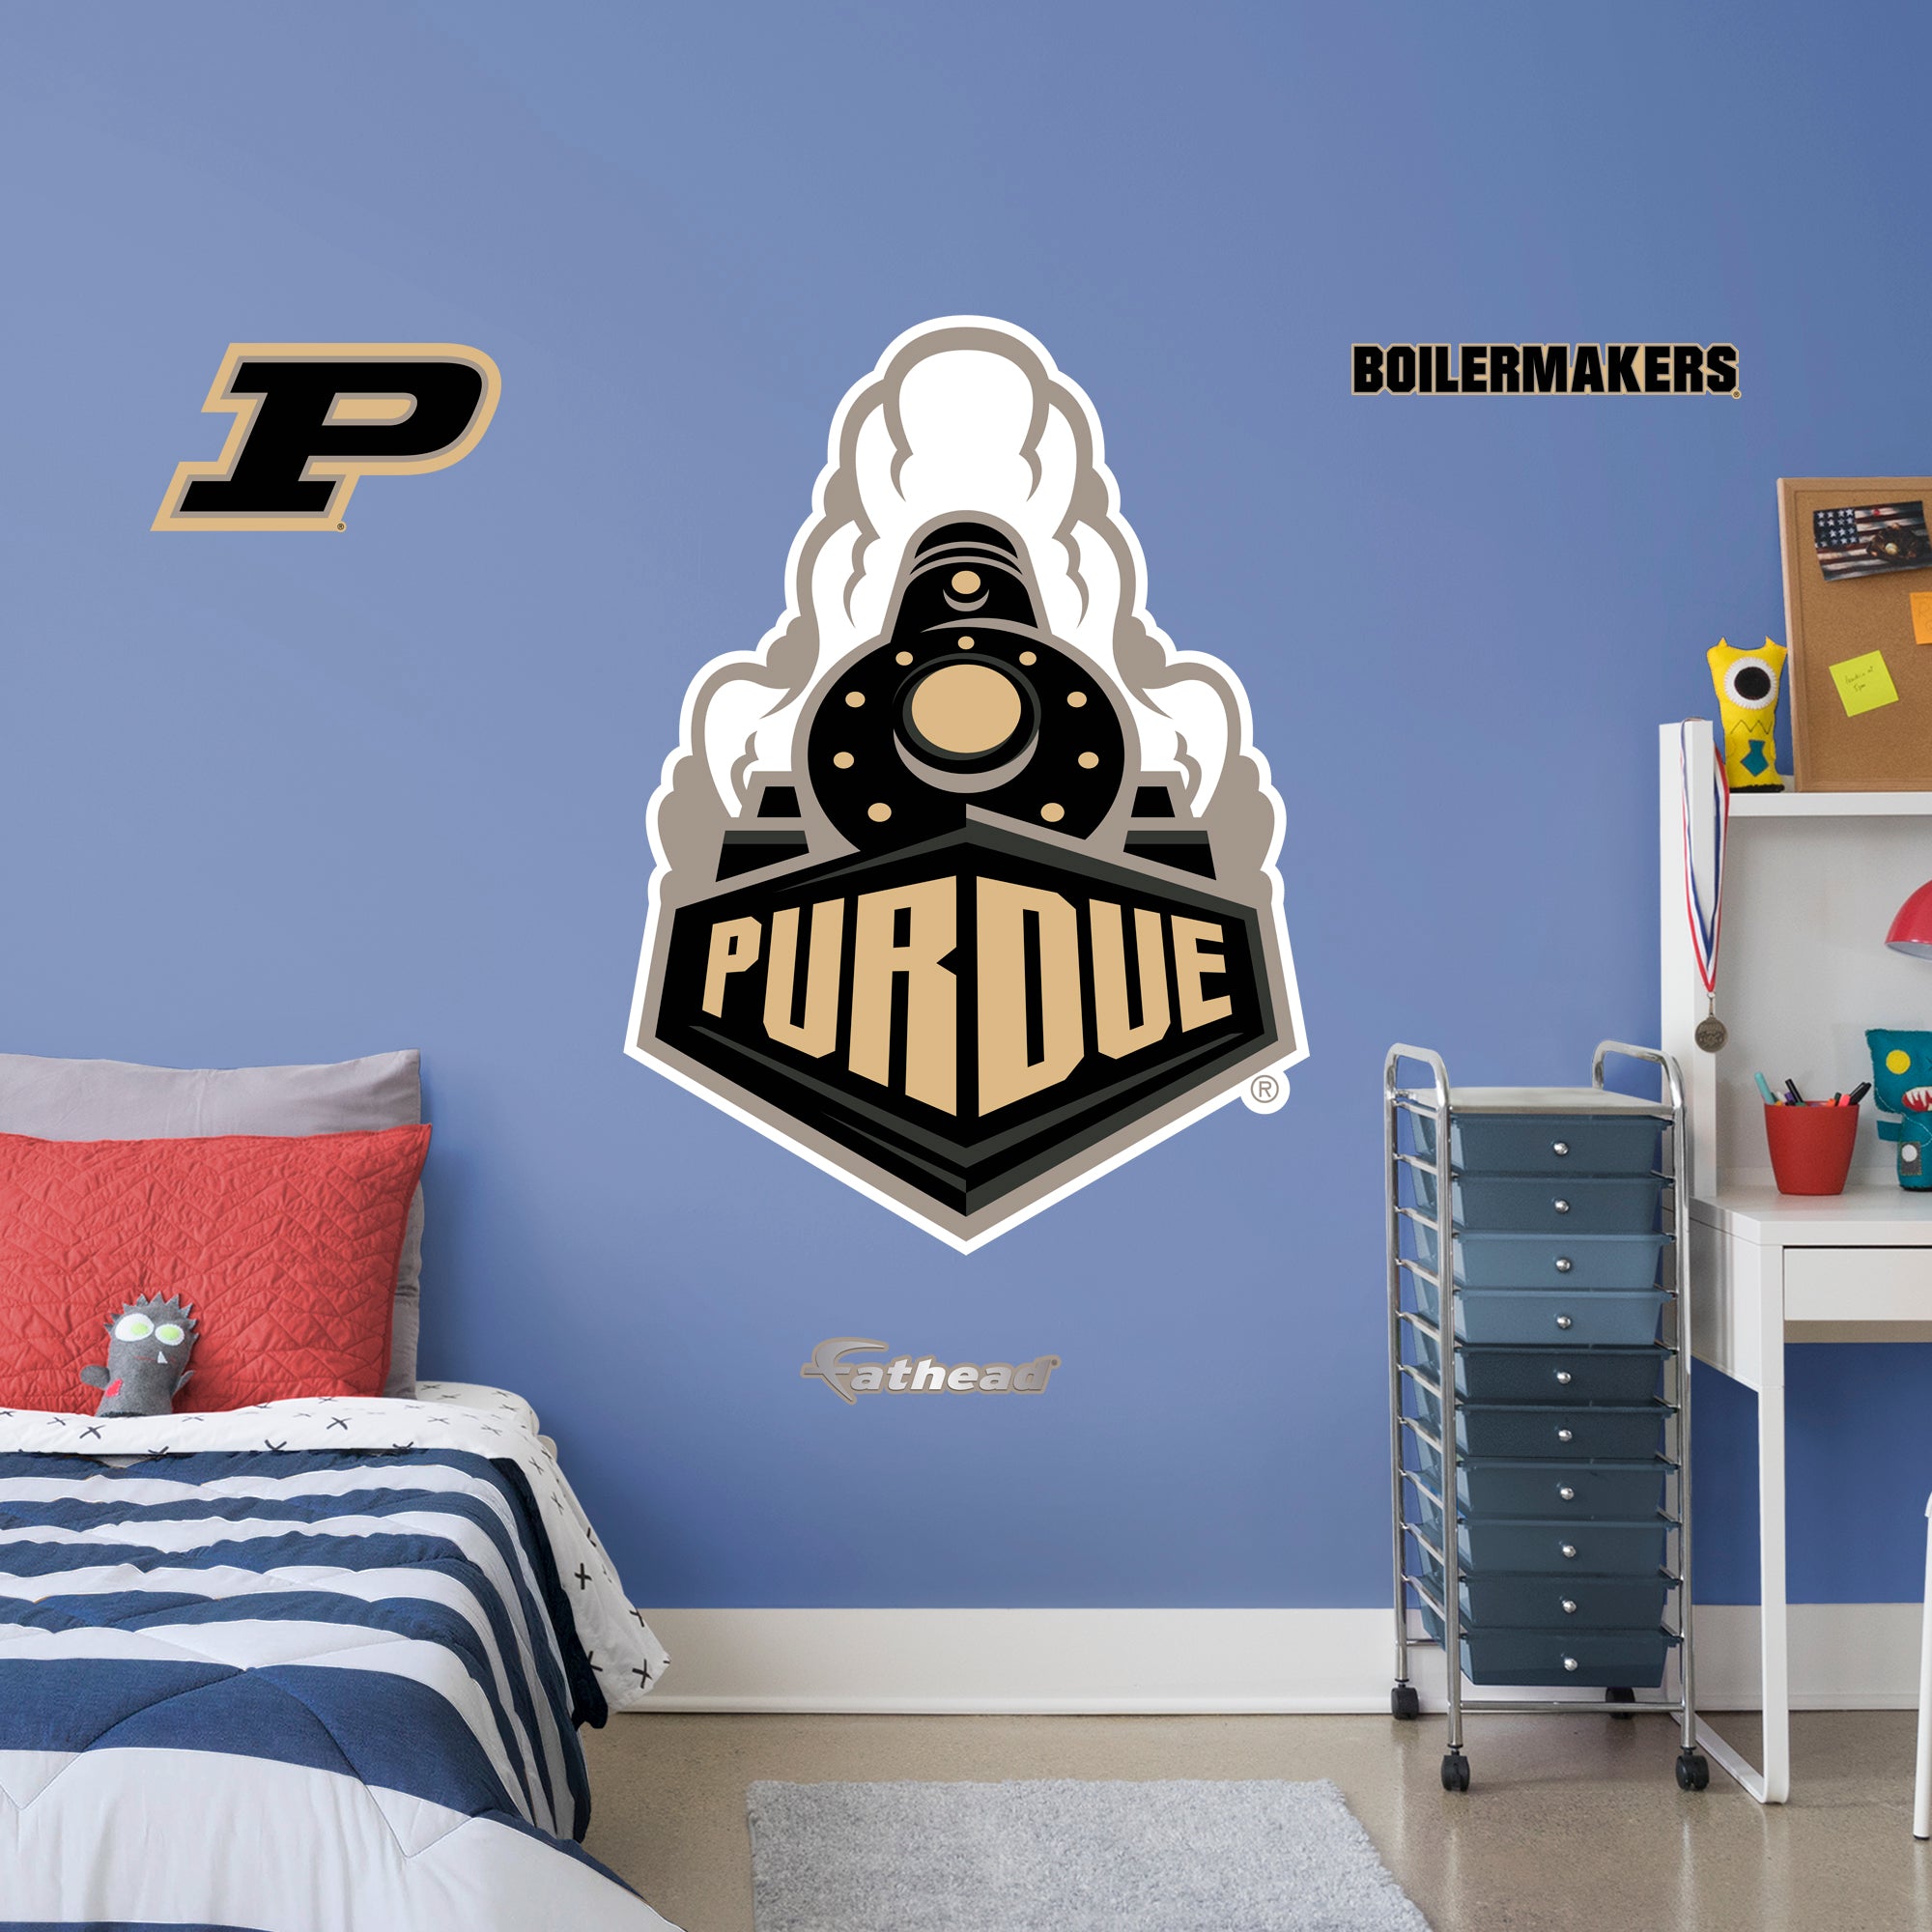 Purdue Boilermakers 2020 Train RealBig Logo - Officially Licensed NCAA Removable Wall Decal Giant Logo + 5 Decals (37"W x 51"H)